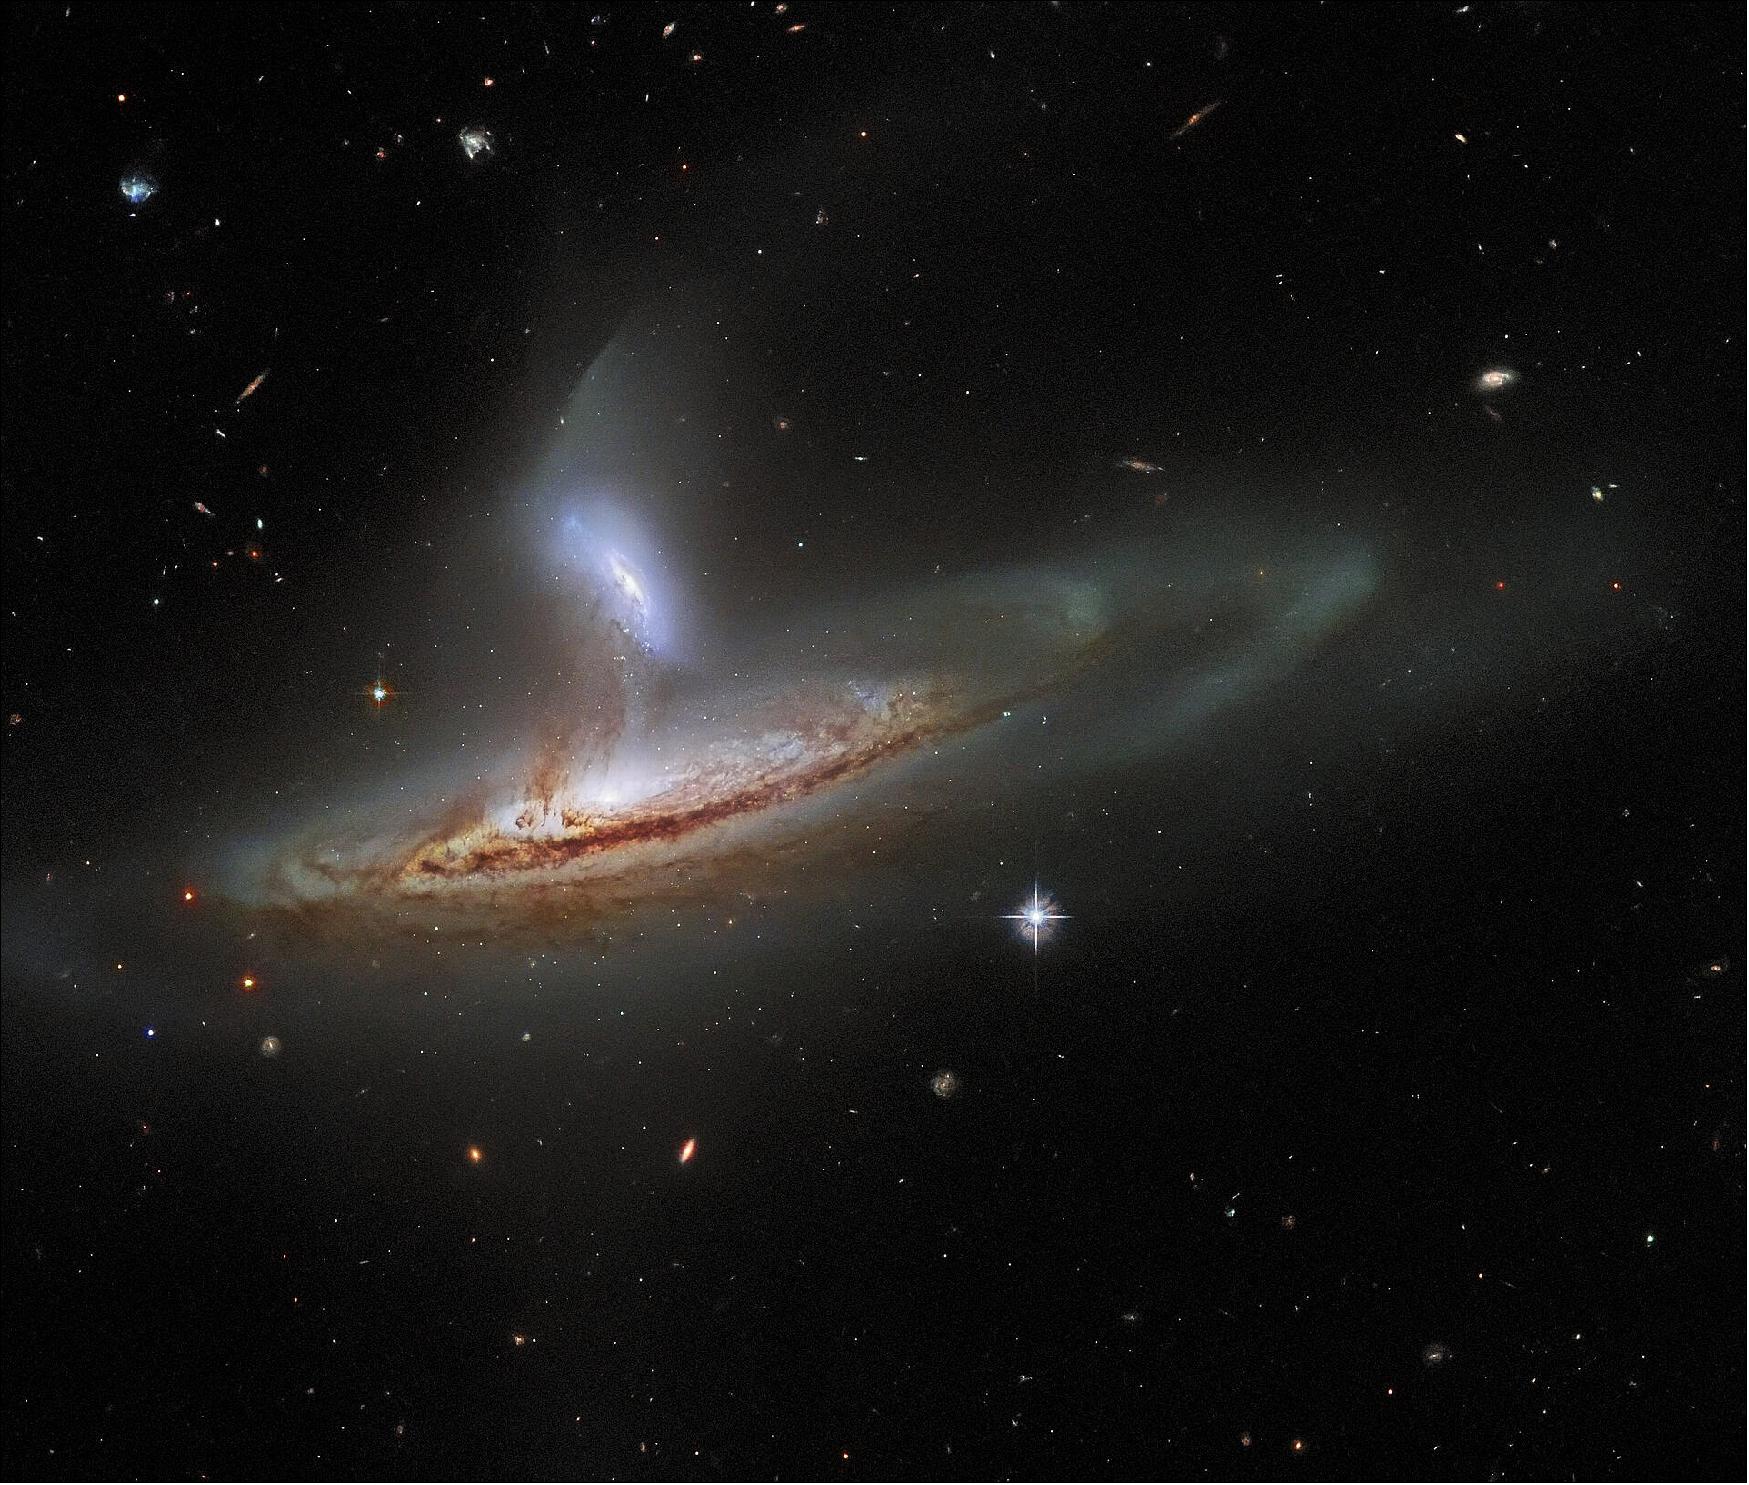 Figure 73: The subject of this image is named Arp 282, an interacting galaxy pair that is composed of the Seyfert galaxy NGC 169 (bottom) and the galaxy IC 1559 (top). If you’re interested in learning more about Seyfert galaxies, you can read about the Seyfert galaxy NGC 5728 here. Interestingly, both of the galaxies comprising Arp 282 have monumentally energetic cores, known as active galactic nuclei (AGN), although it is difficult to tell that from this image. This is actually rather fortunate, because if the full emission of two AGNs was visible in this image, then it would probably obscure the beautifully detailed tidal interactions occurring between NGC 169 and IC 1559. Tidal forces occur when an object’s gravity causes another object to distort or stretch. The direction of the tidal forces will be away from the lower-mass object and towards the higher mass object. When two galaxies interact, gas, dust and even entire solar systems will be drawn away from one galaxy towards the other by these tidal forces. This process can actually be seen in action in this image — delicate streams of matter have formed, visibly linking the two galaxies (image credit: ESA/Hubble & NASA, J. Dalcanton, Dark Energy Survey, DOE, FNAL/DECam, CTIO/NOIRLab/NSF/AURA, SDSS; CC BY 4.0 Acknowledgement: J. Schmidt)